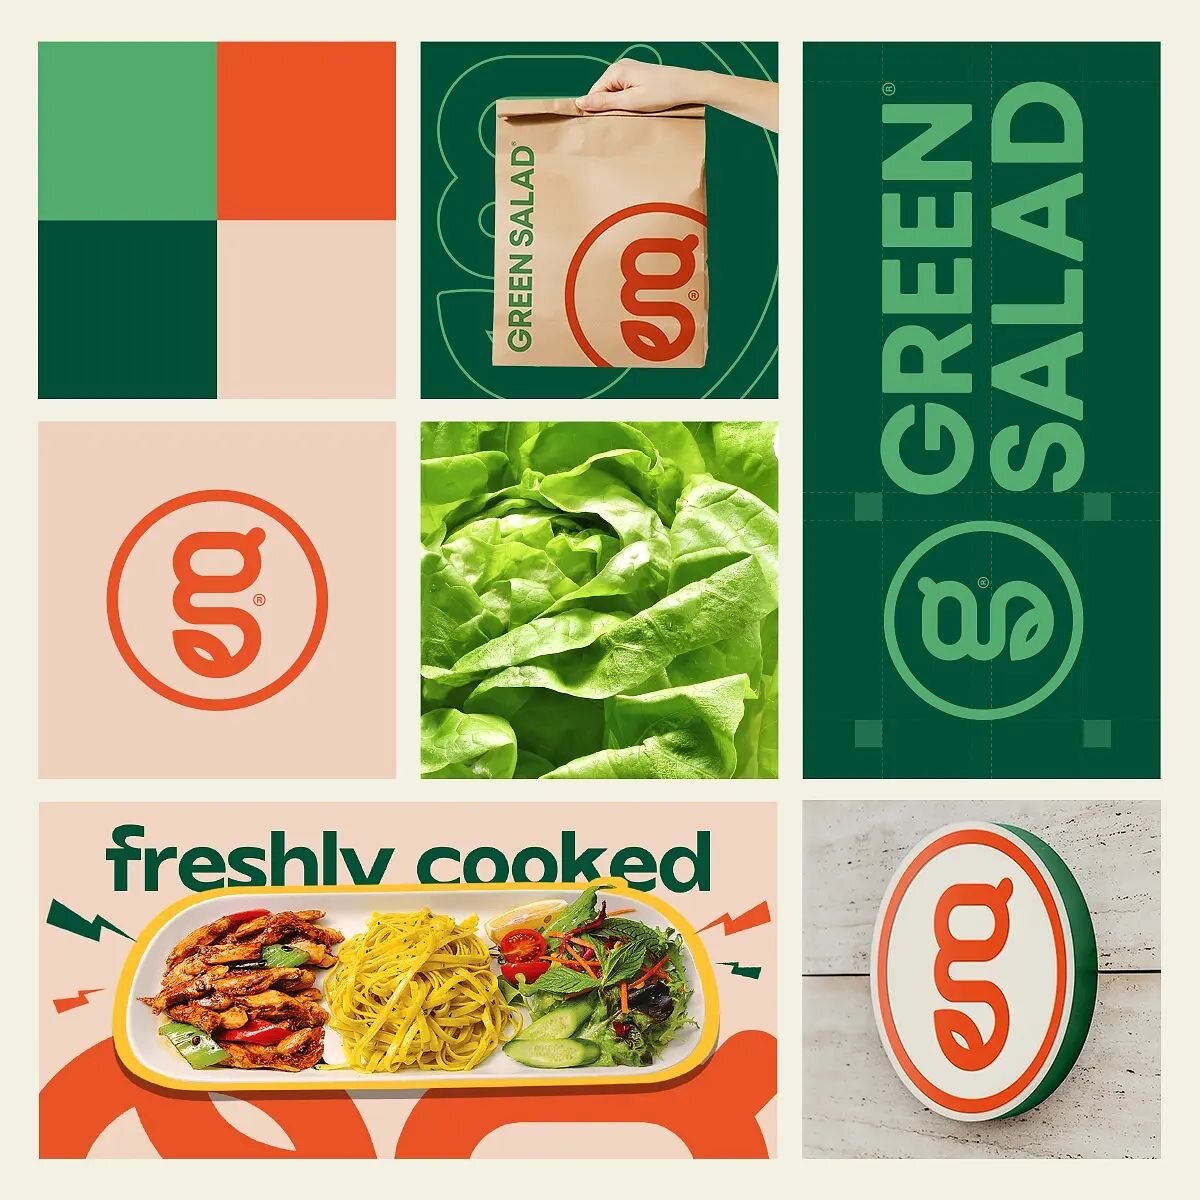 First long plate concept restaurant  Green Salad got new brand. It was really challenging but we started by designing the unique symbol, representing both letters &quot;g&quot; and &quot;s&quot; also added small leaf detail on the tail 🍃

We also ch